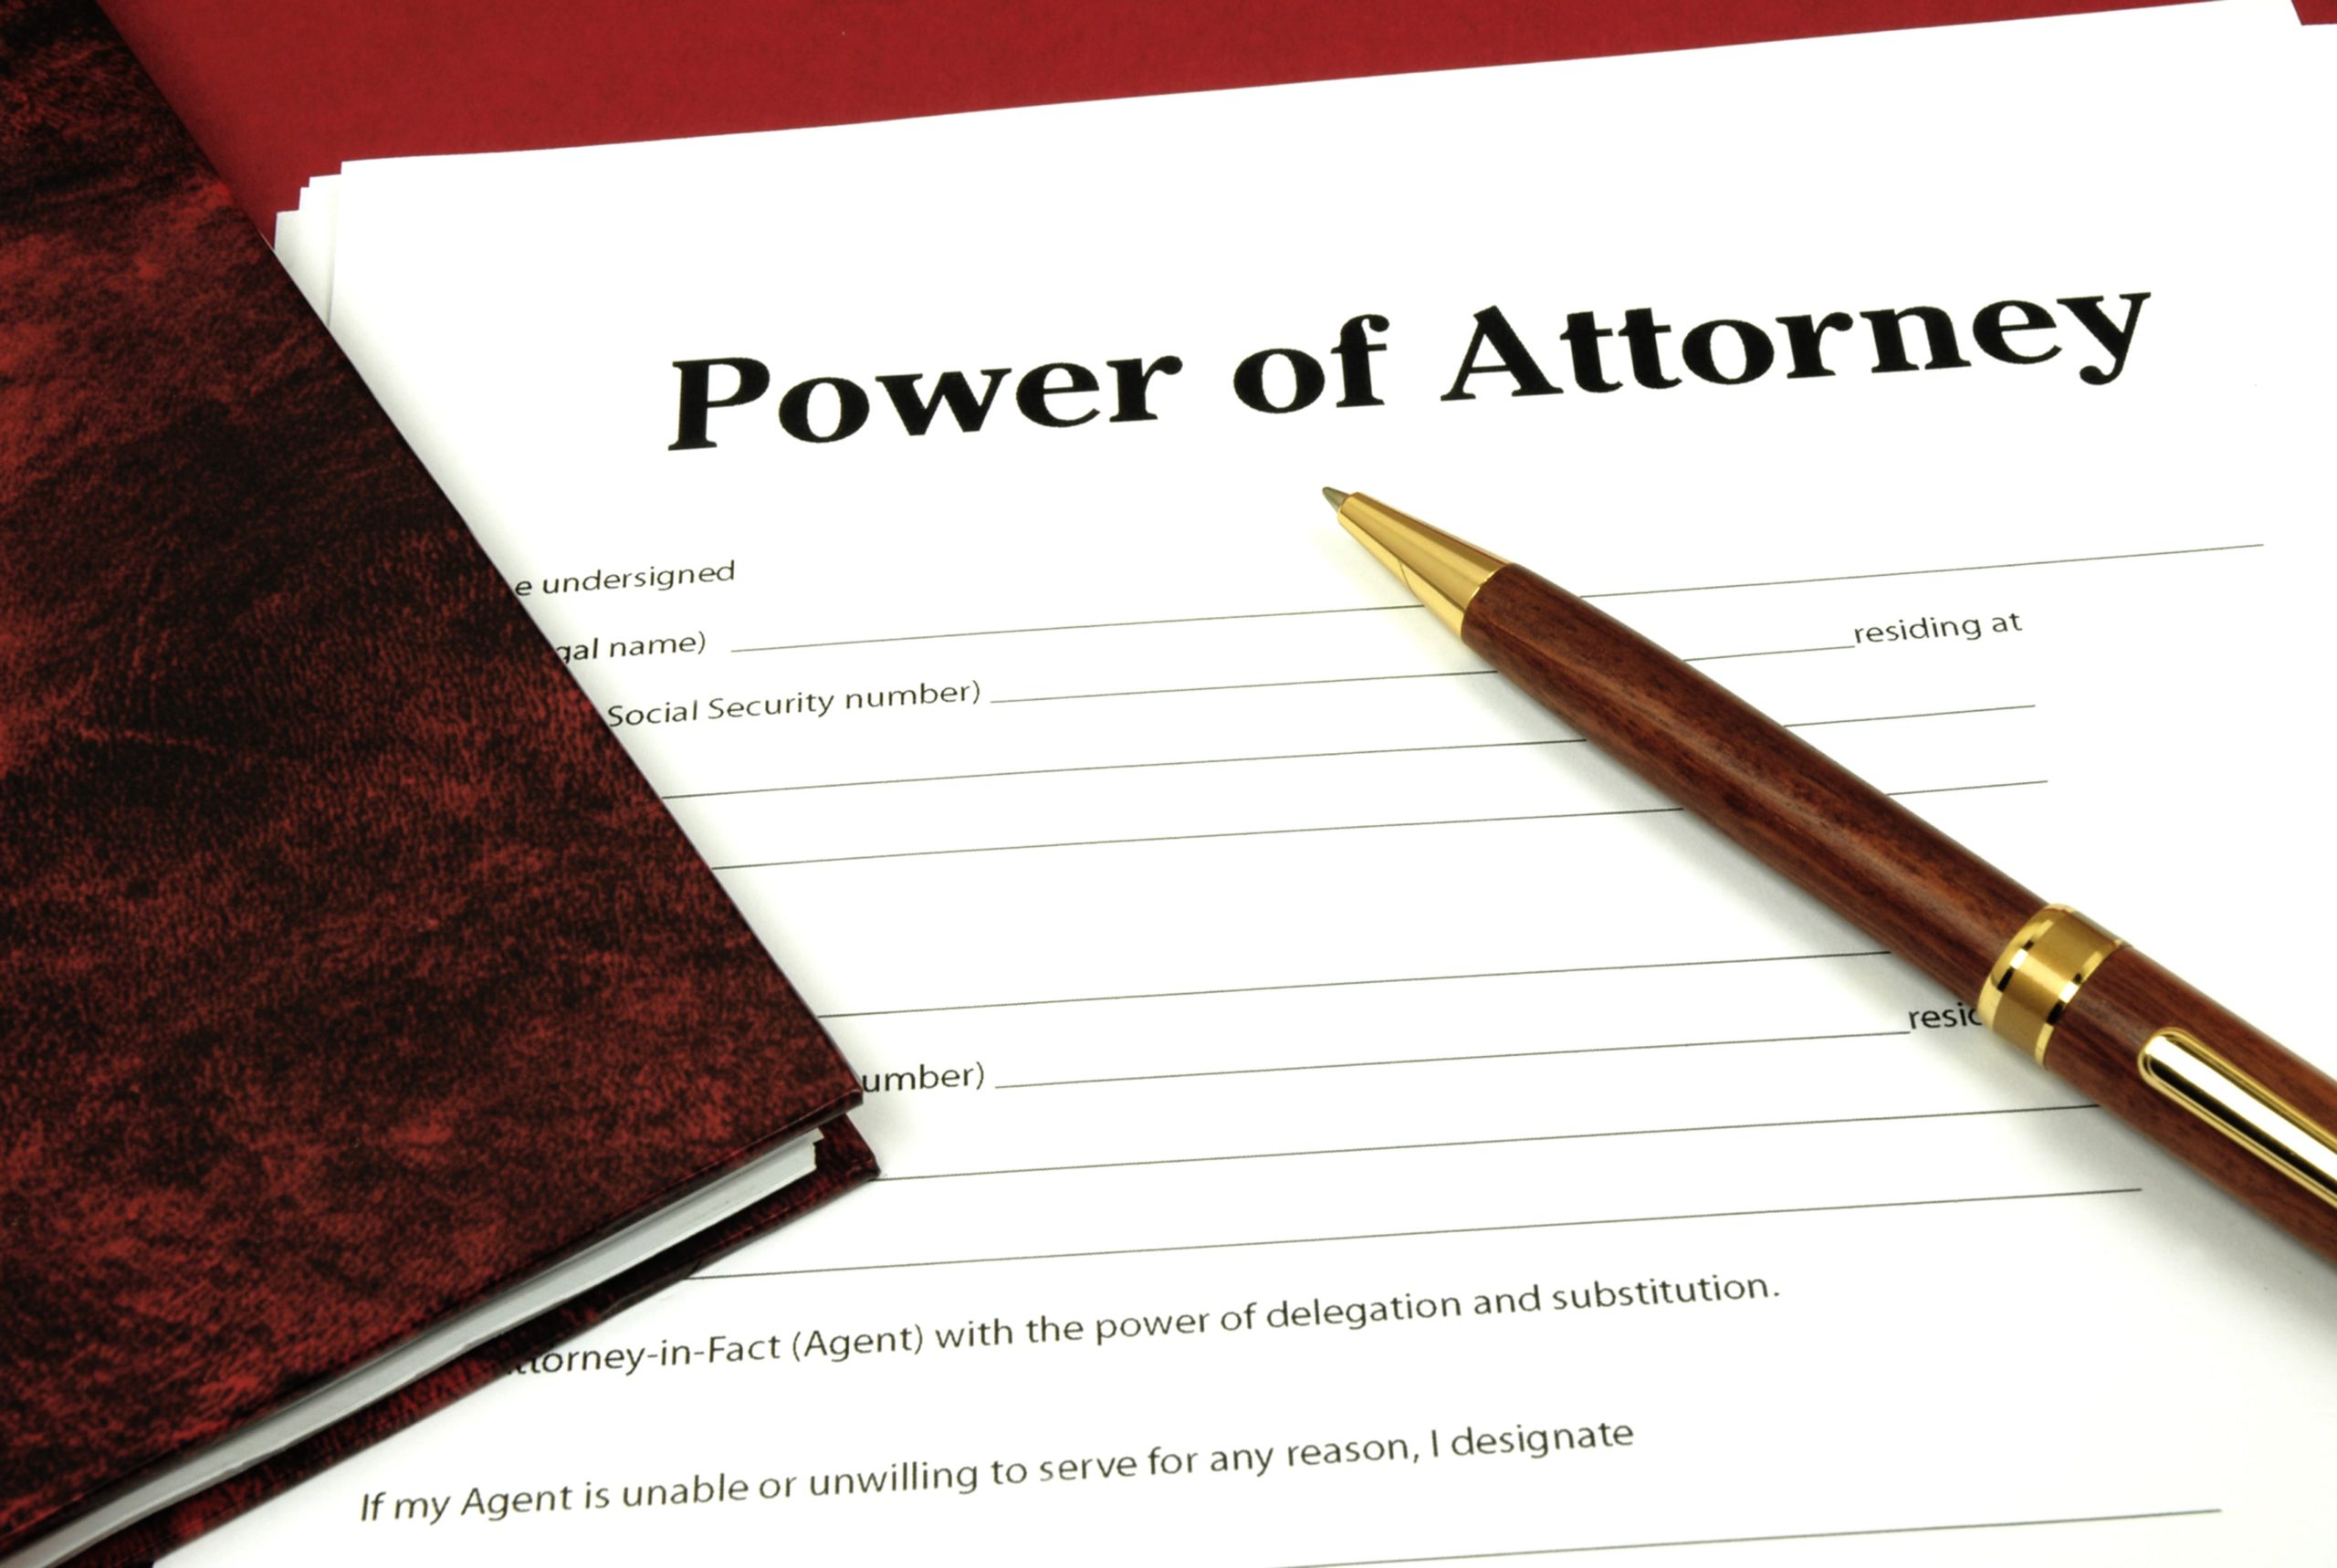 Power of attorney paper with pen and book